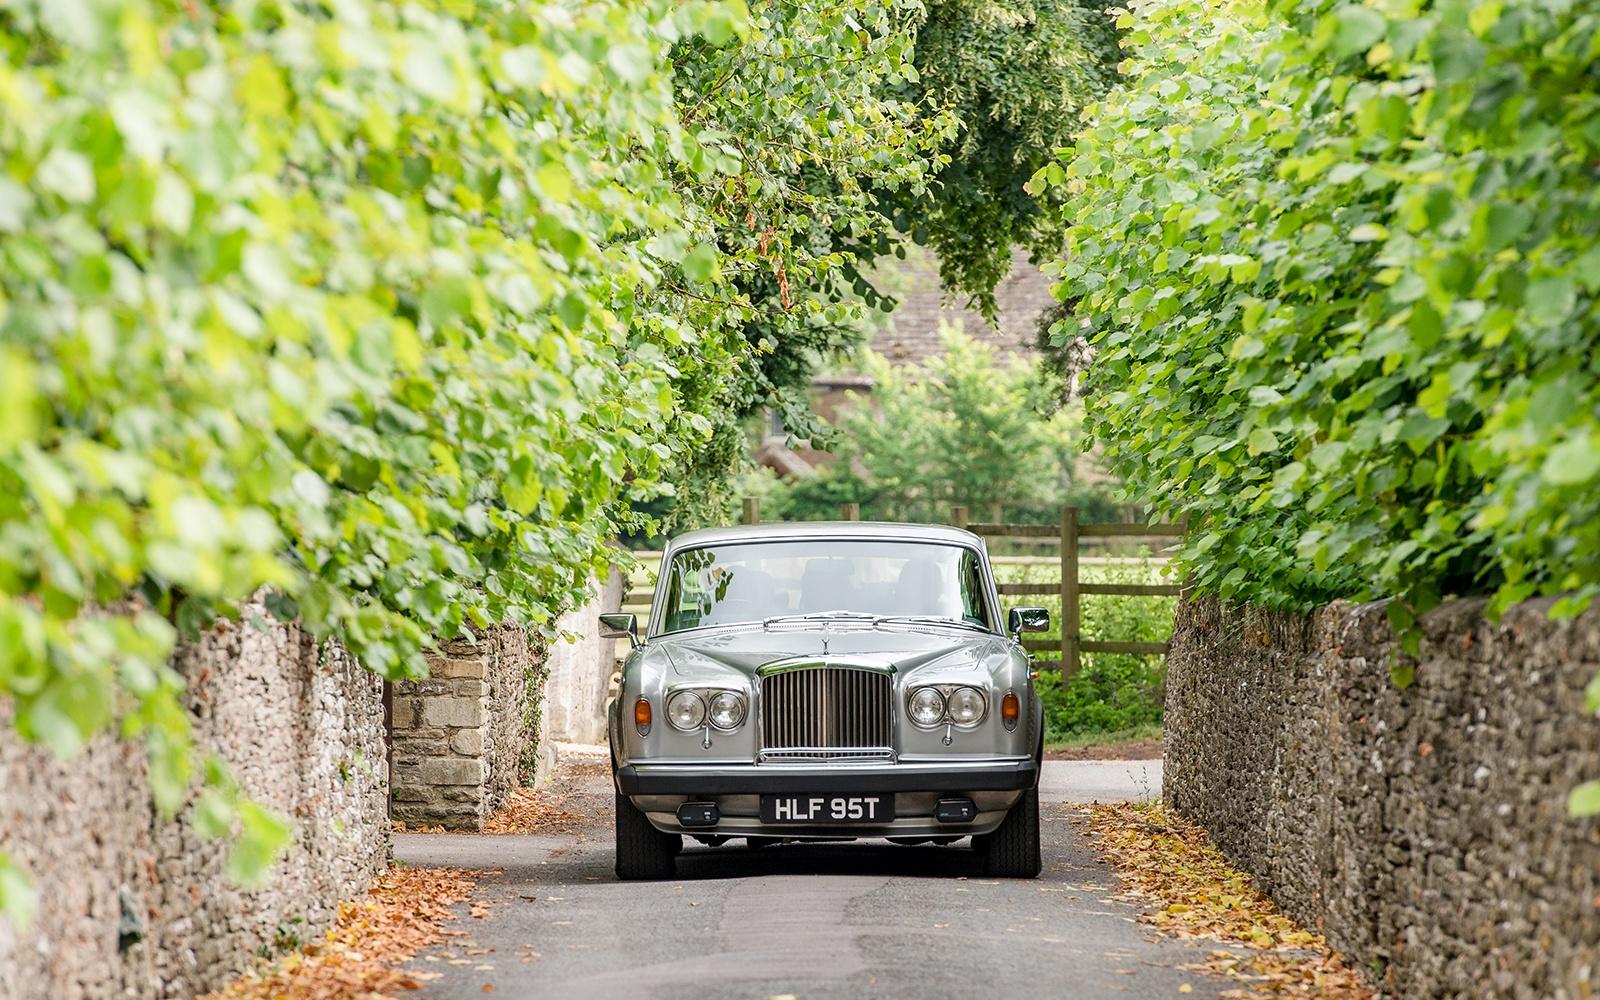 Real Wedding Capture Every Moment Cirencester photography duo wedding photographer transport wedding car vintage